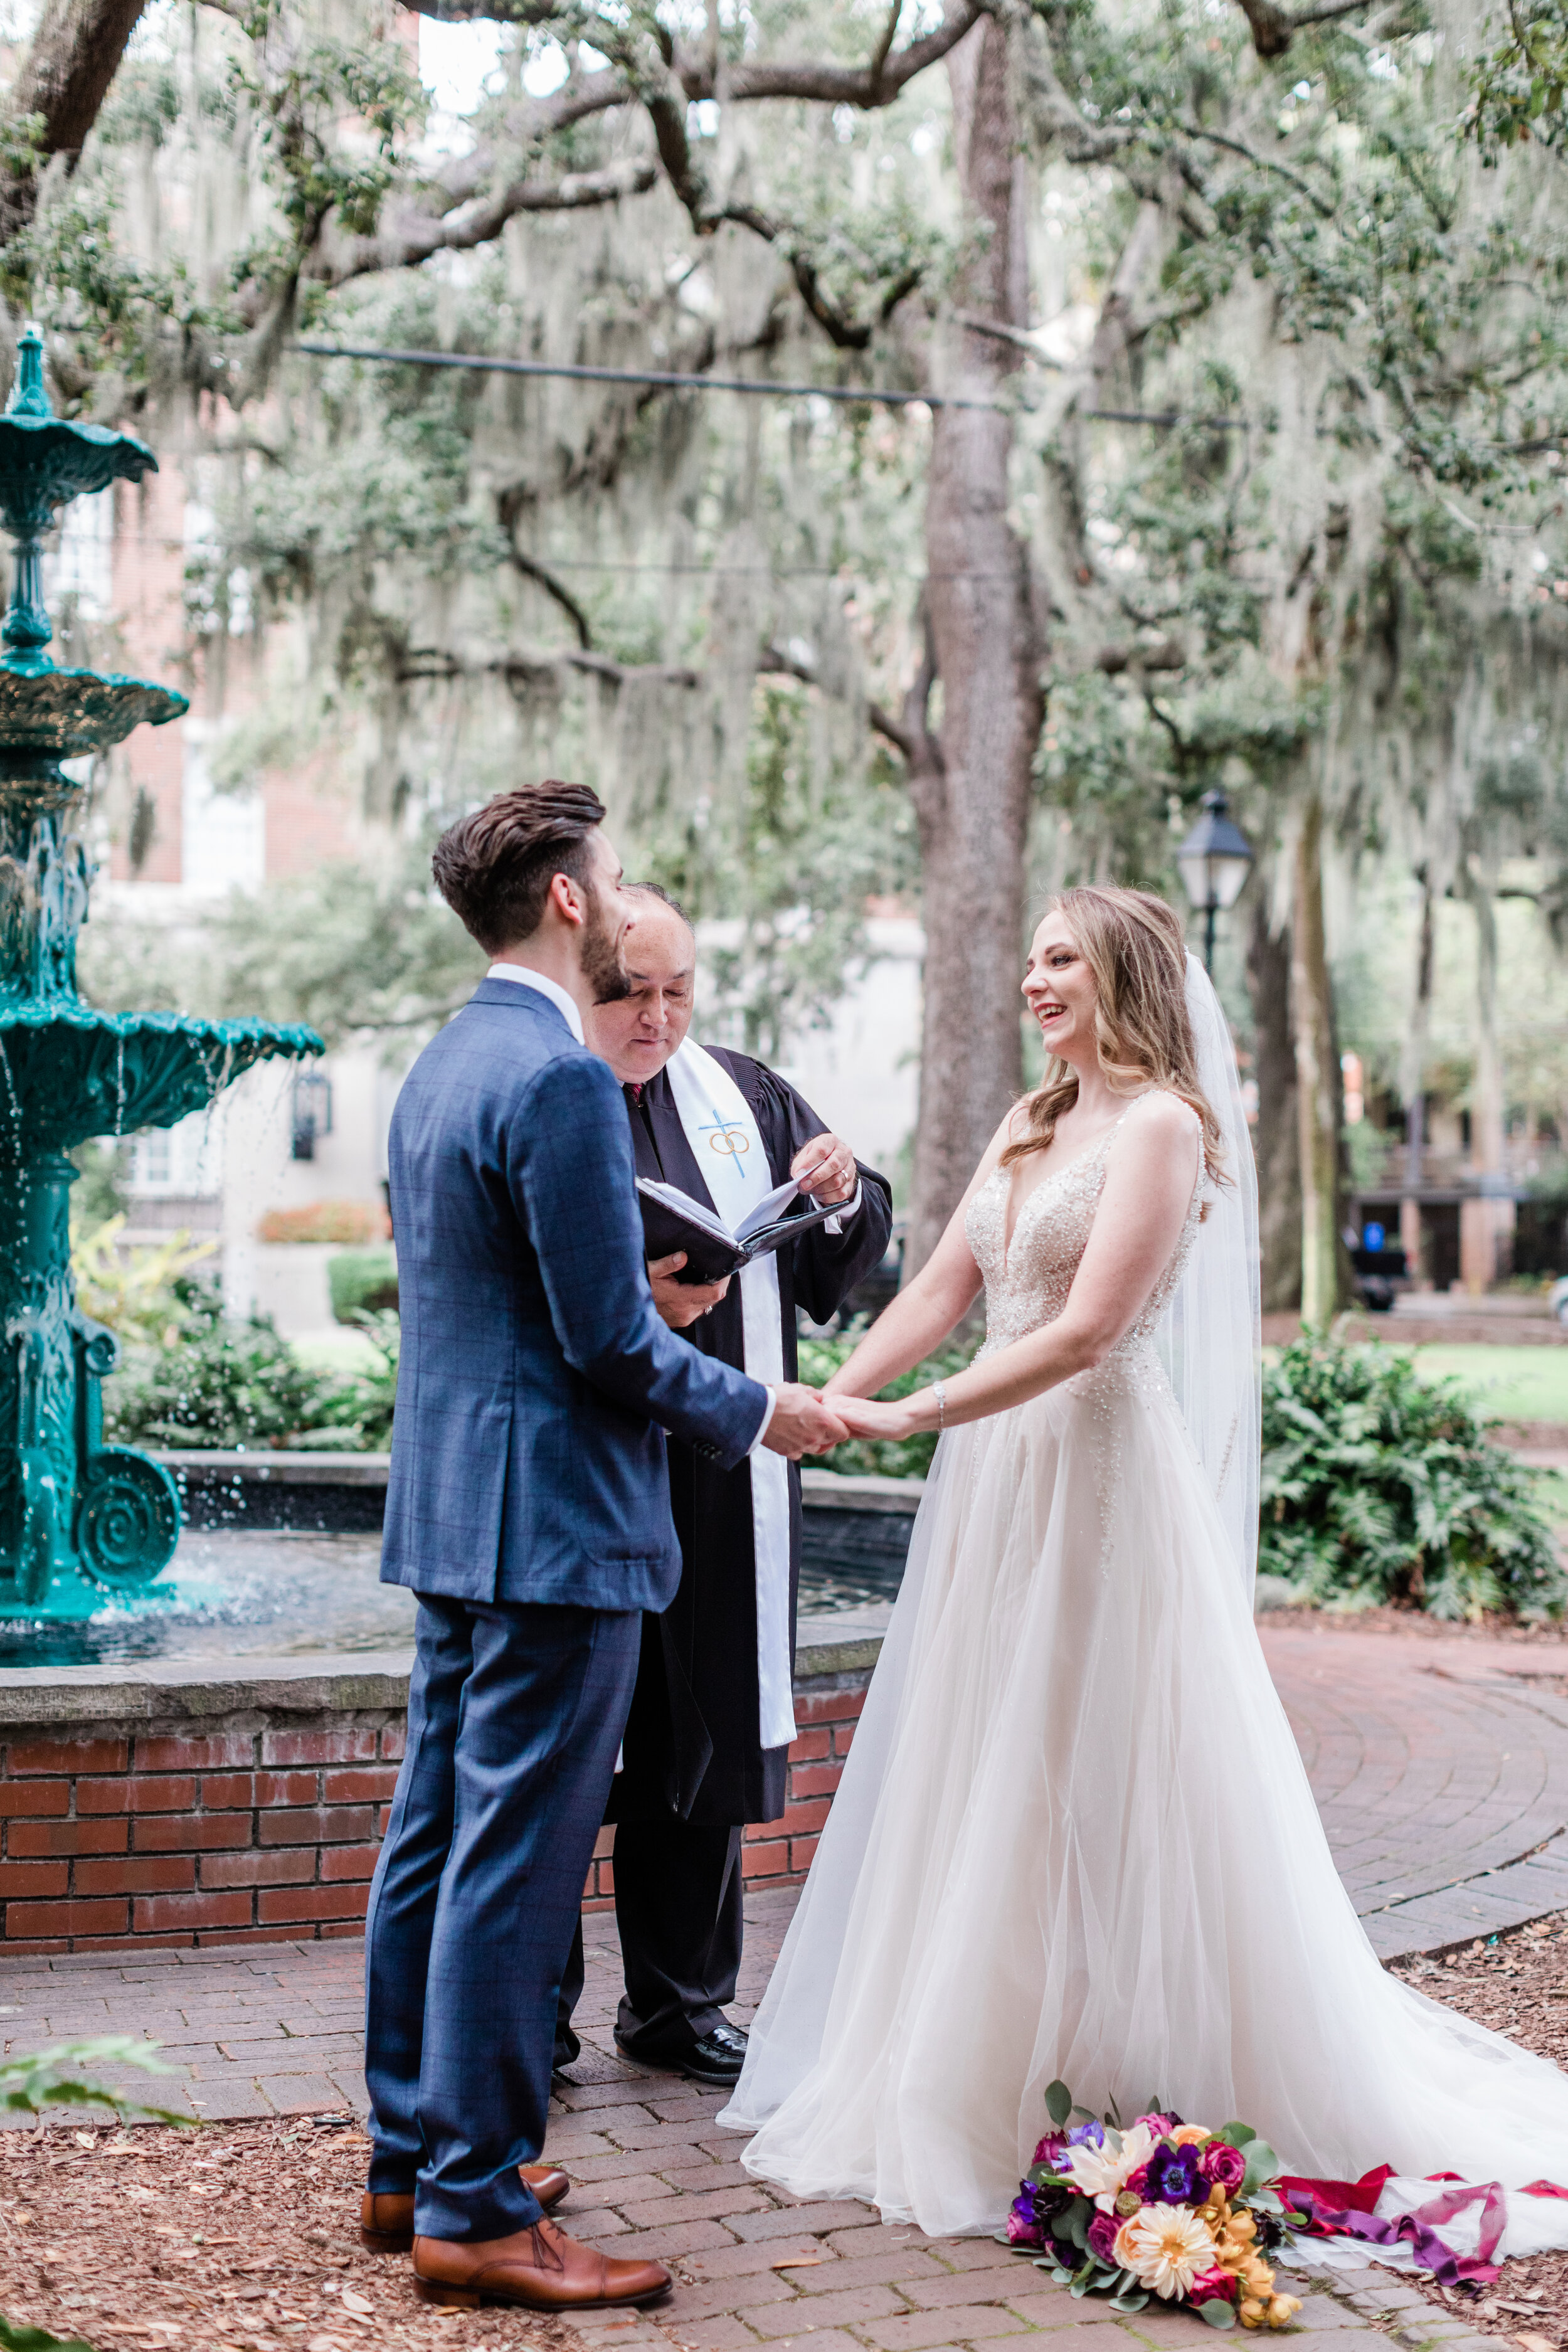 ivory-and-beau-florals-ashley-and-gerald-elopement-flowers-elope-savannah-elopement-package-flowers-florals-florist-savannah-florist-wedding-florist-bright-colorful-flowers-AptBPhoto_AshleyGerard-91.jpg